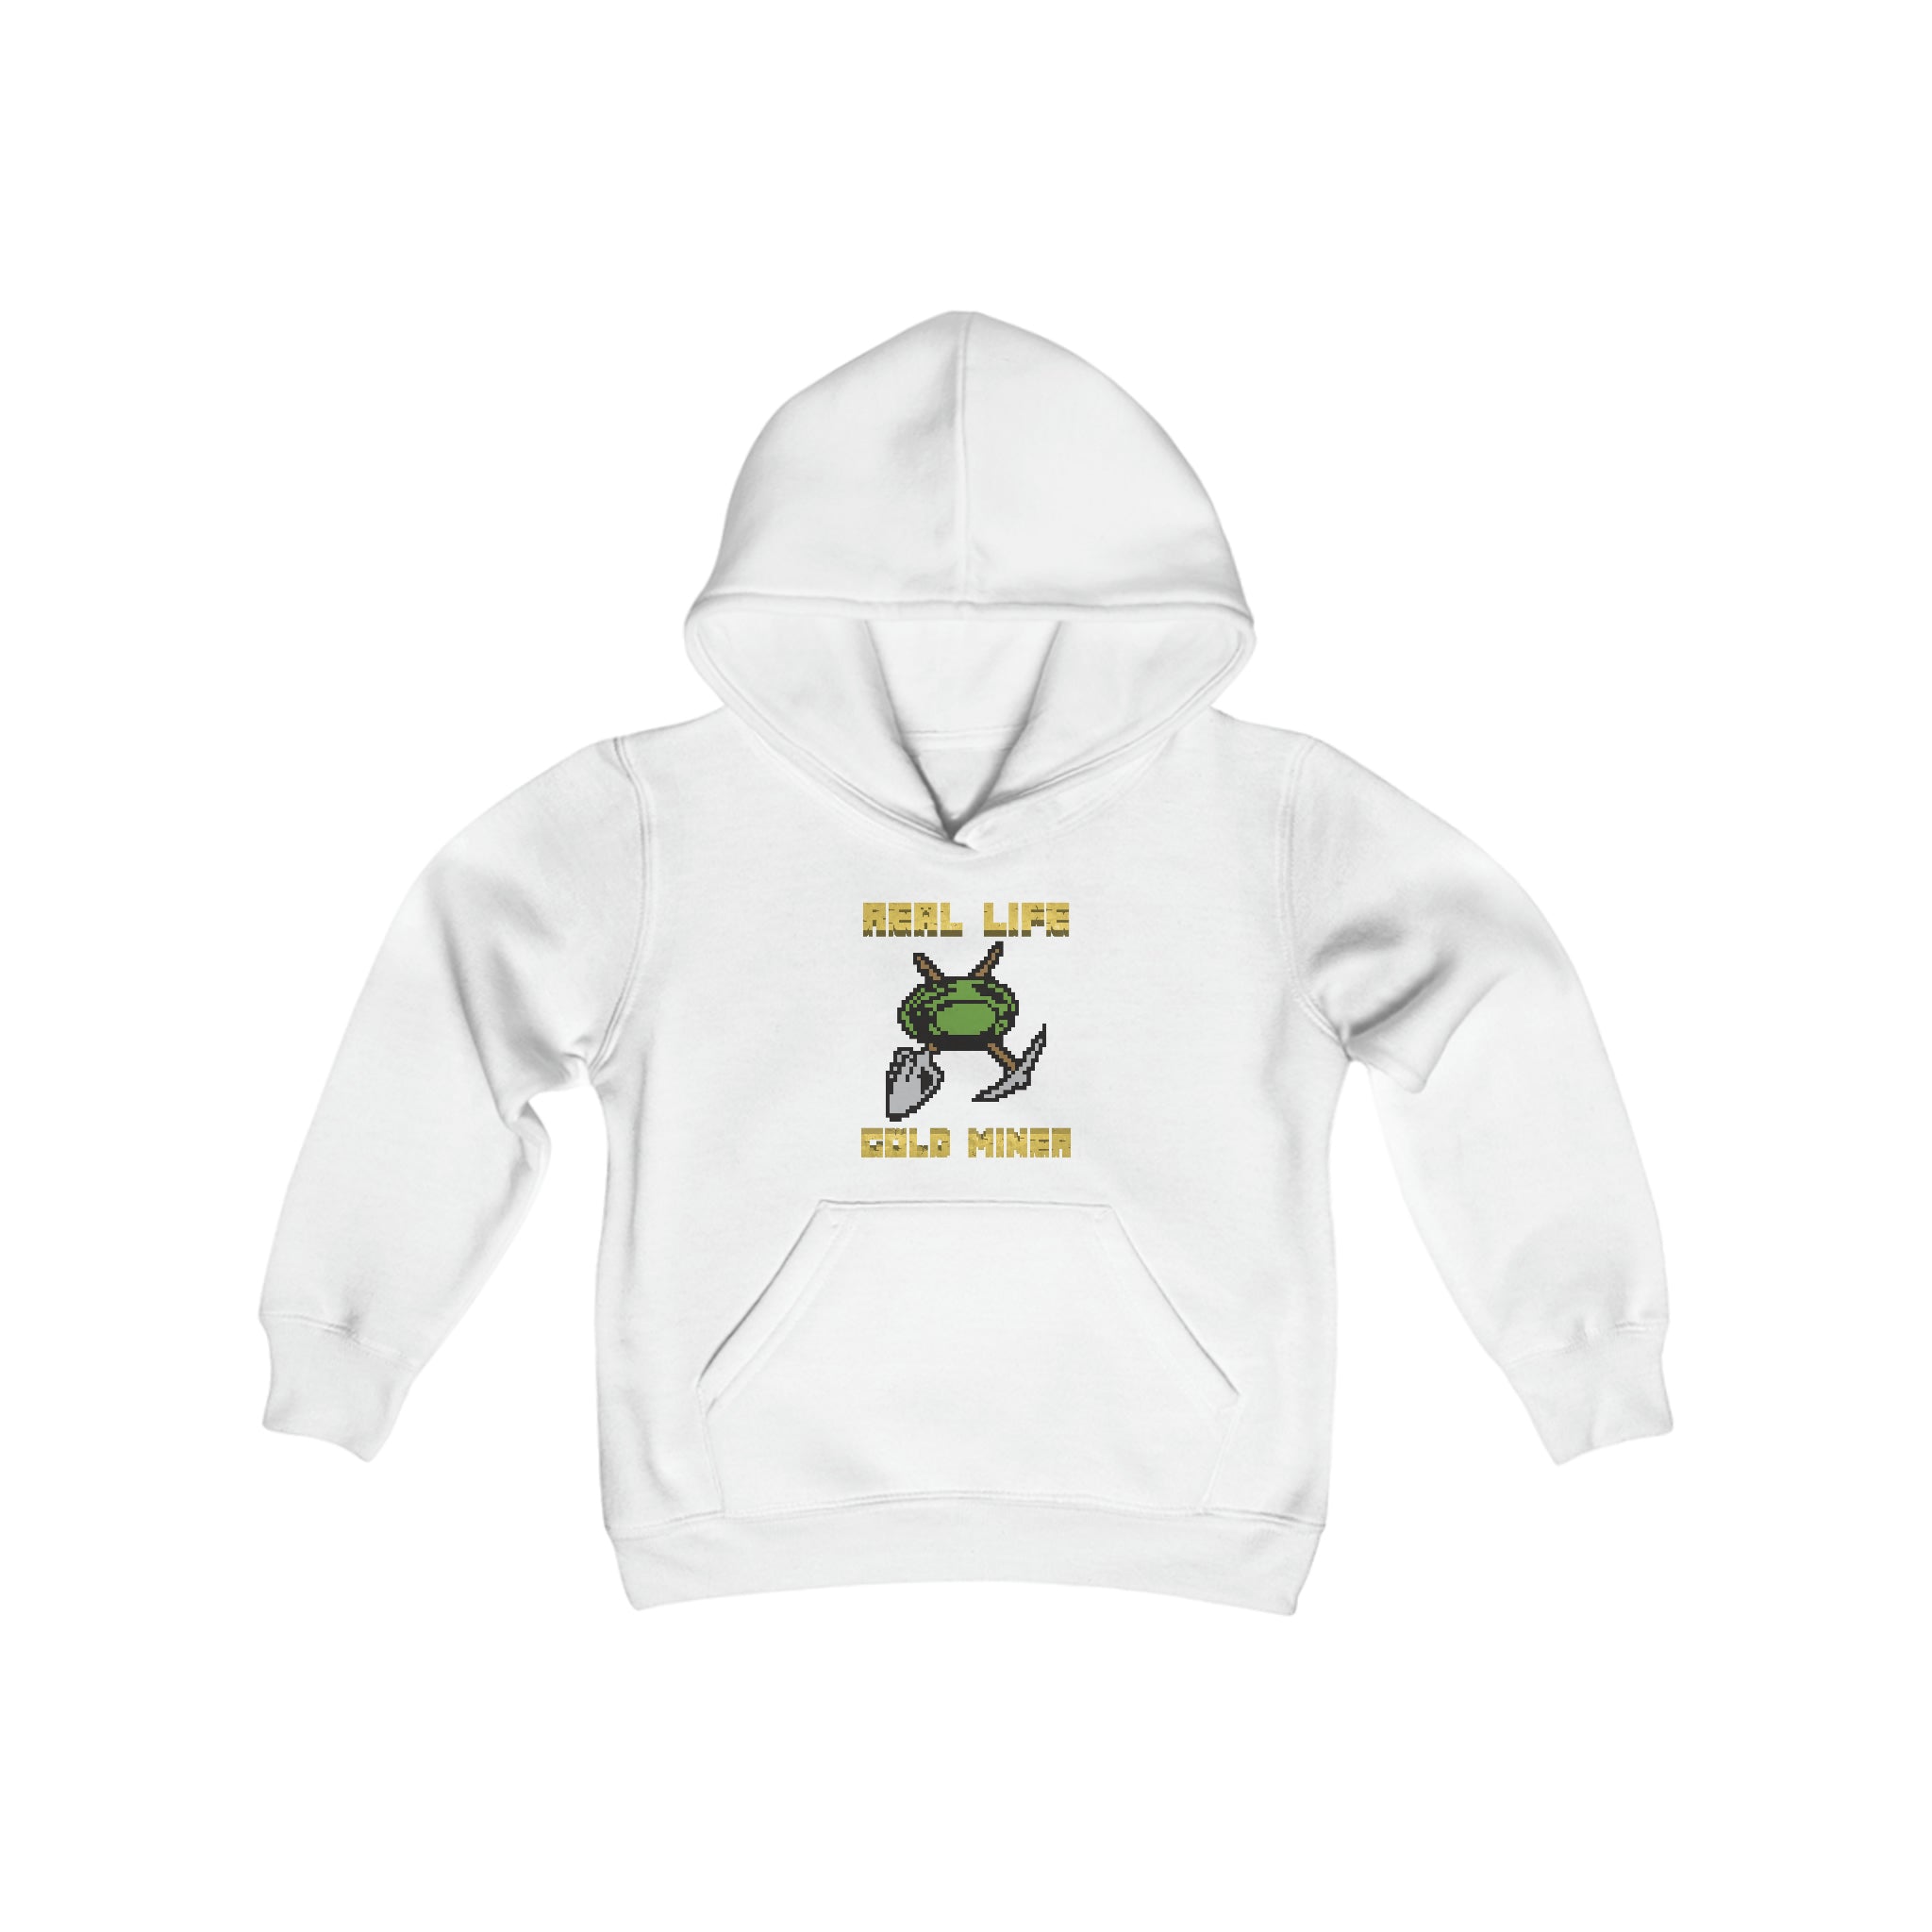 Real Life Gold Miner - Youth Heavy Blend Hooded Sweatshirt